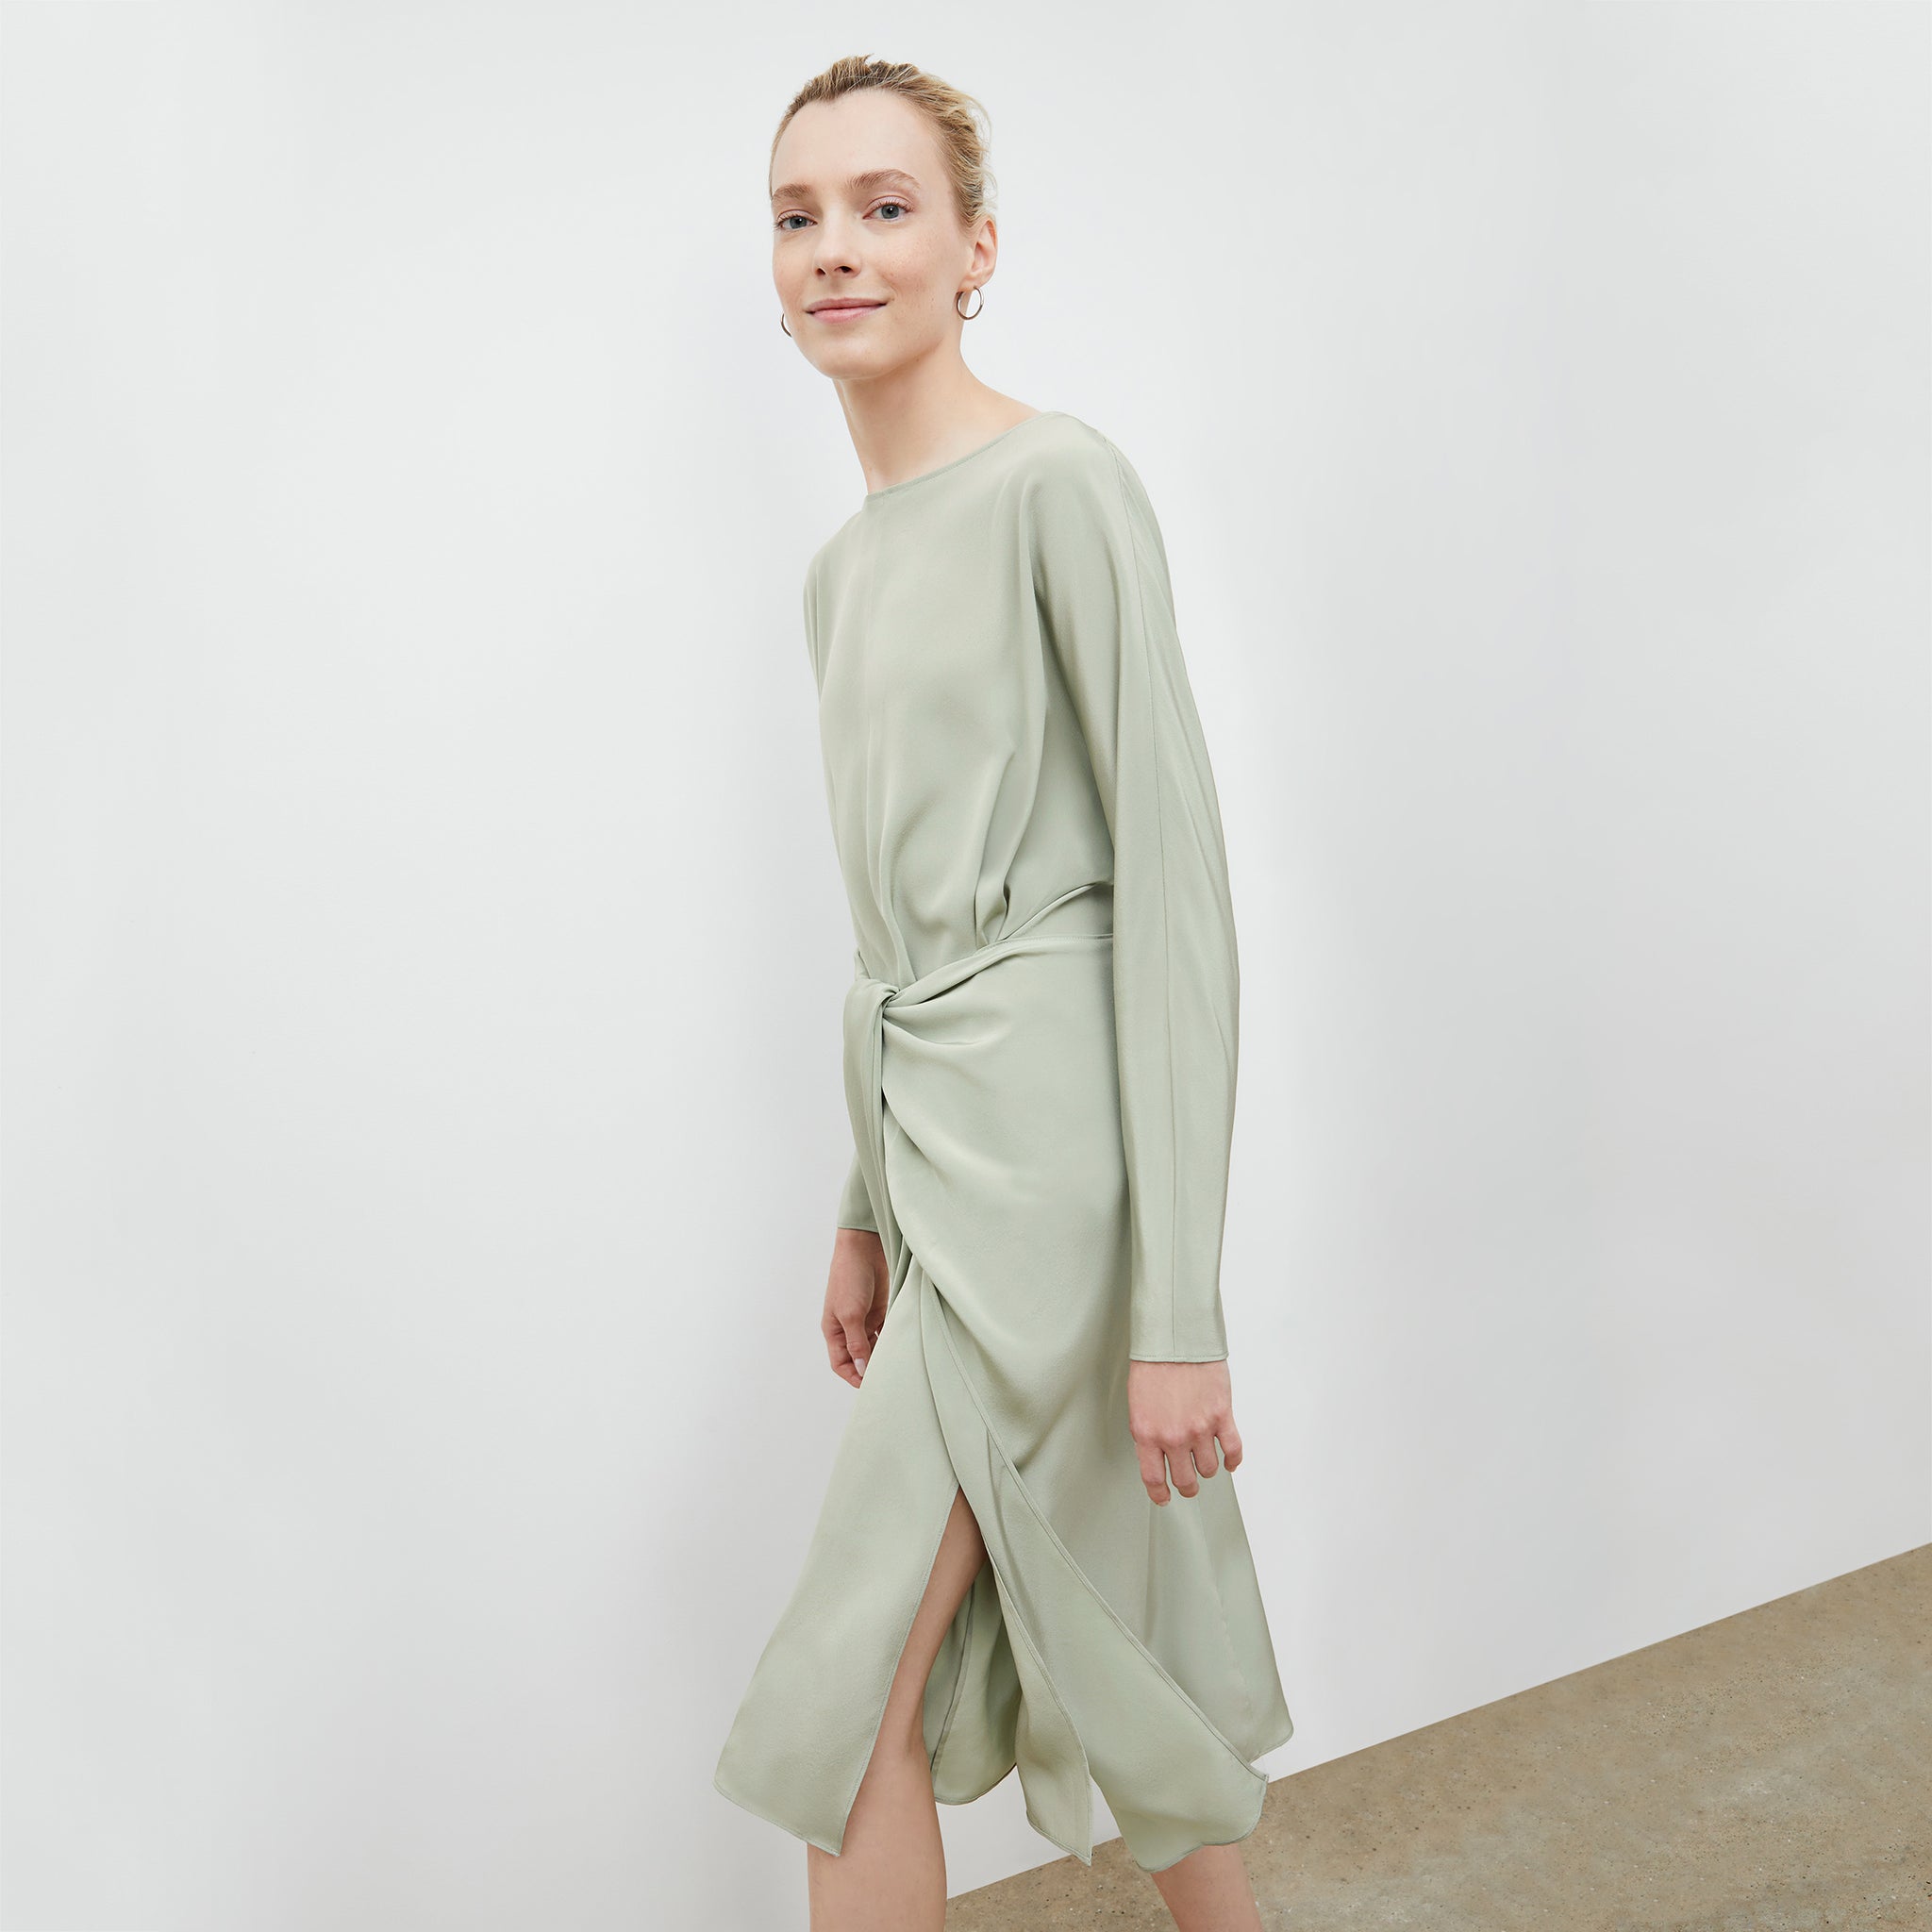 Front image of a woman wearing the Rashmeen dress in Minty Green